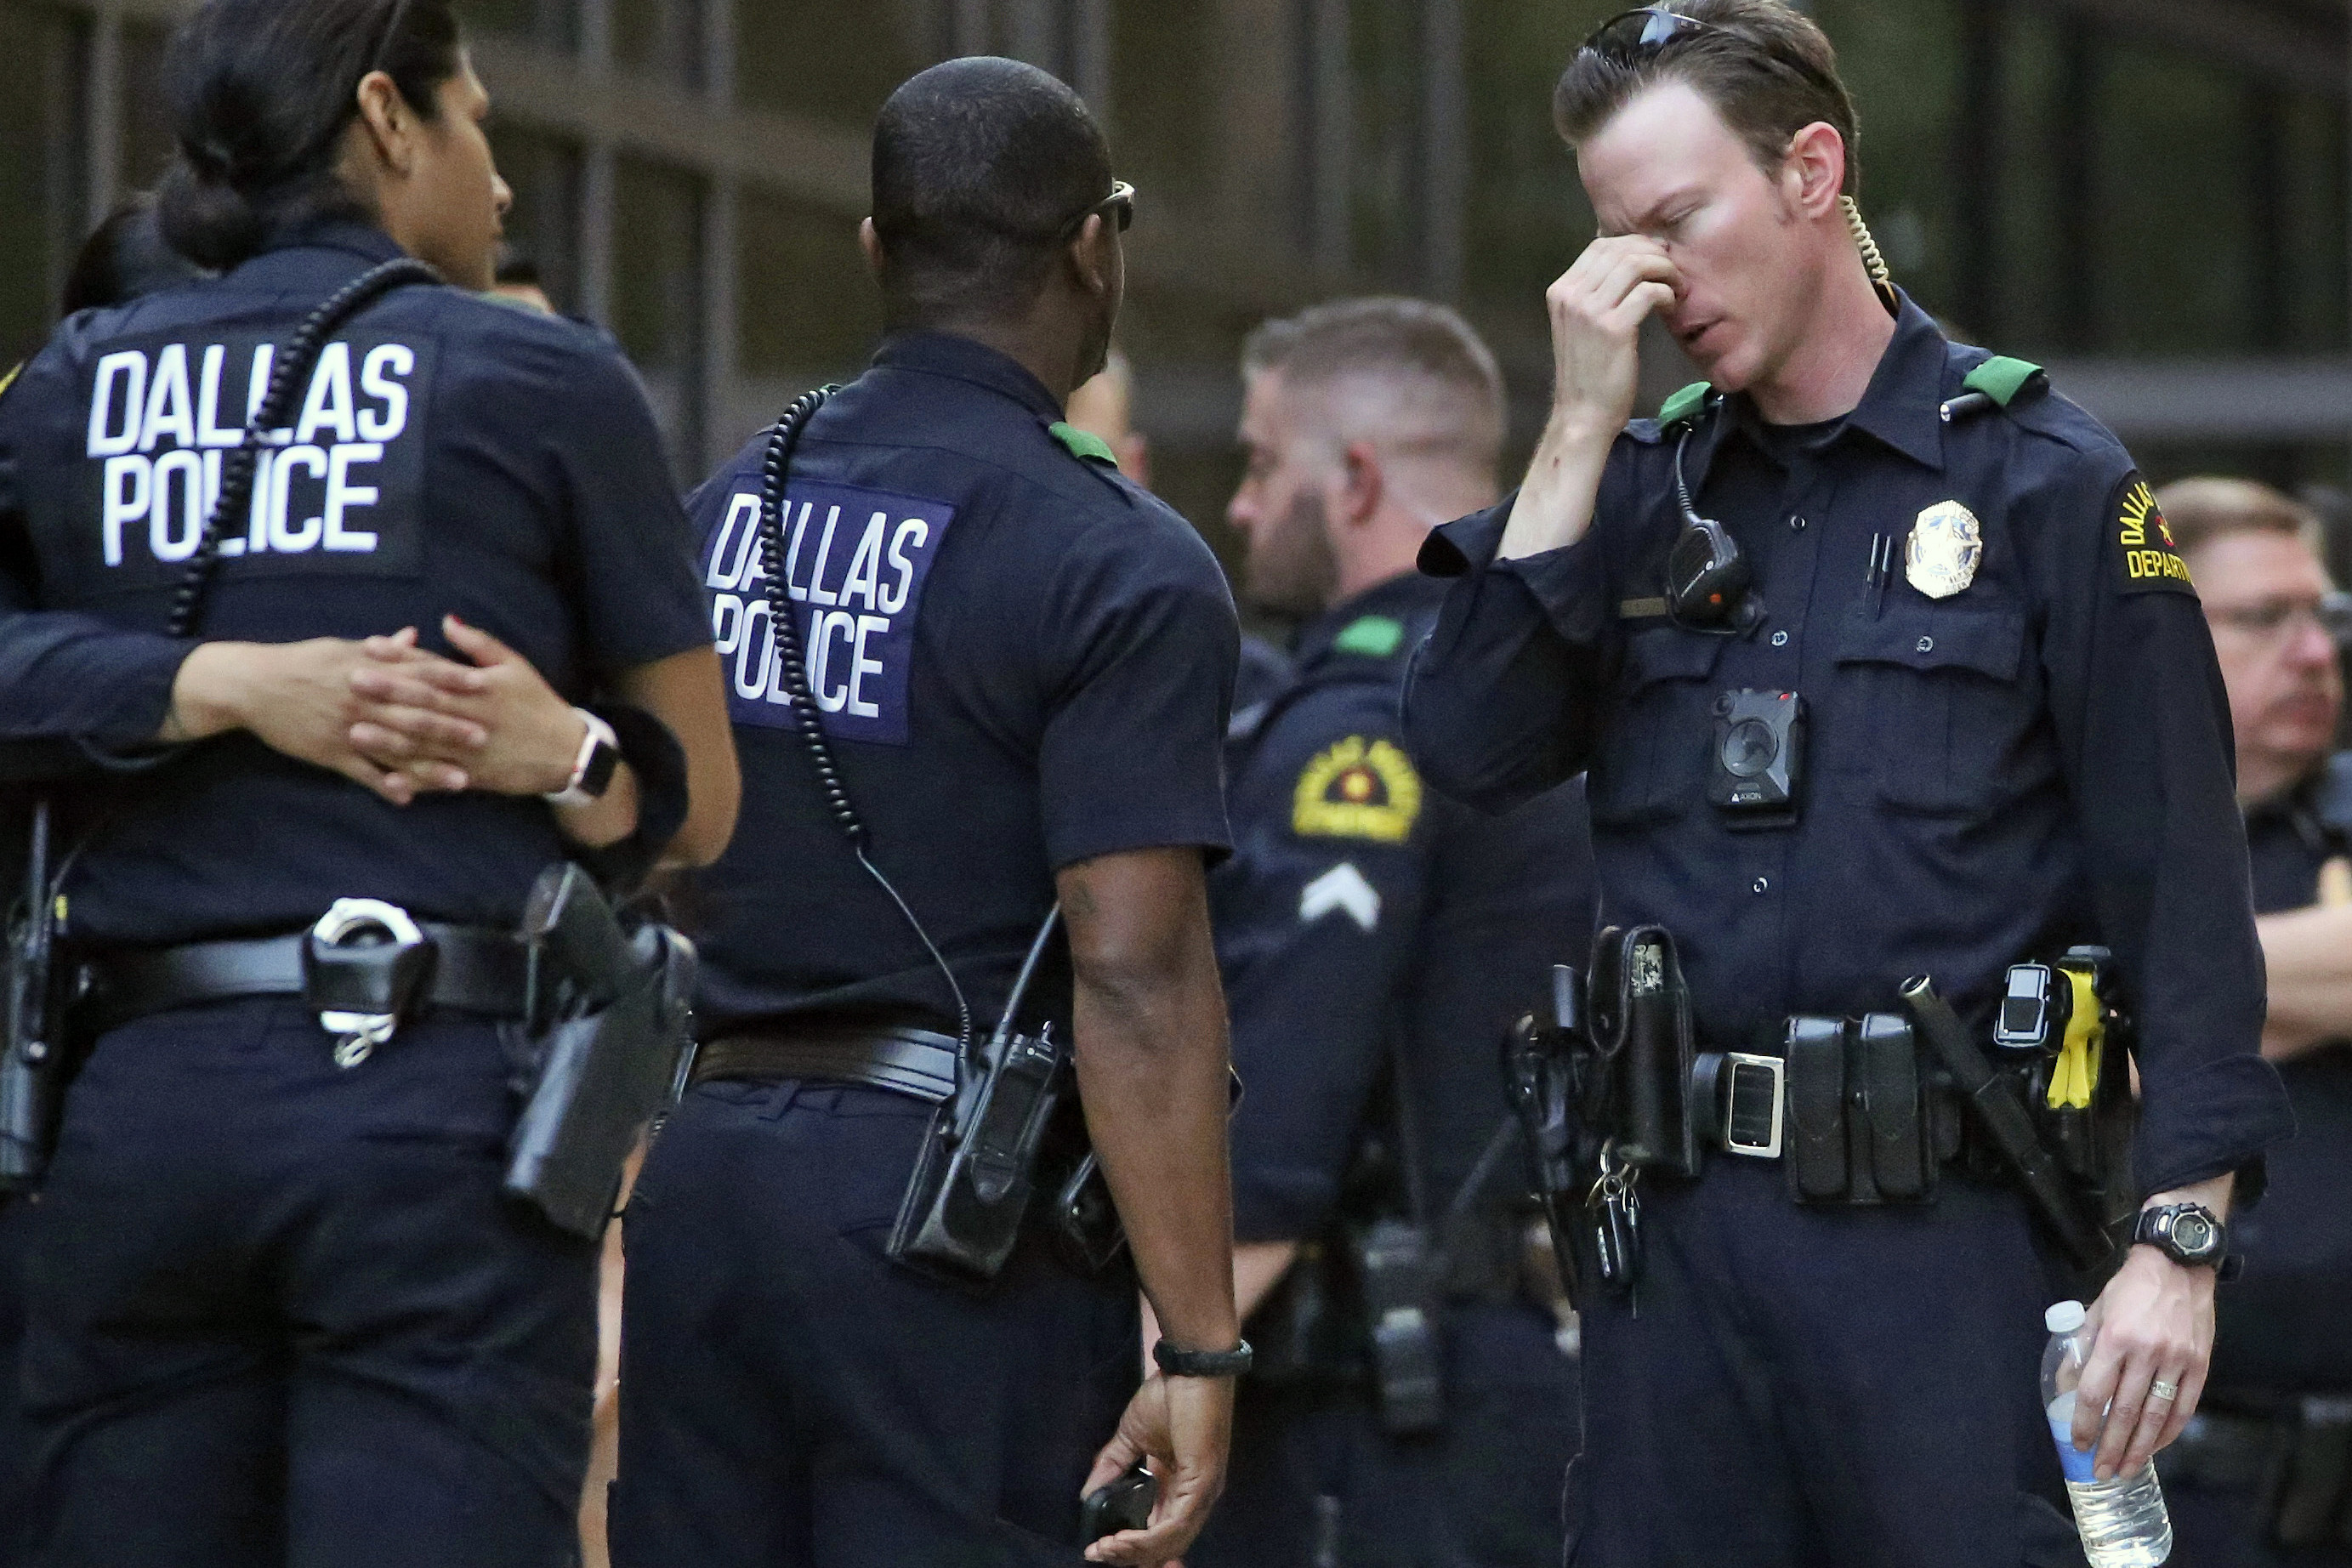 Suspect arrested in shooting of two Dallas officers